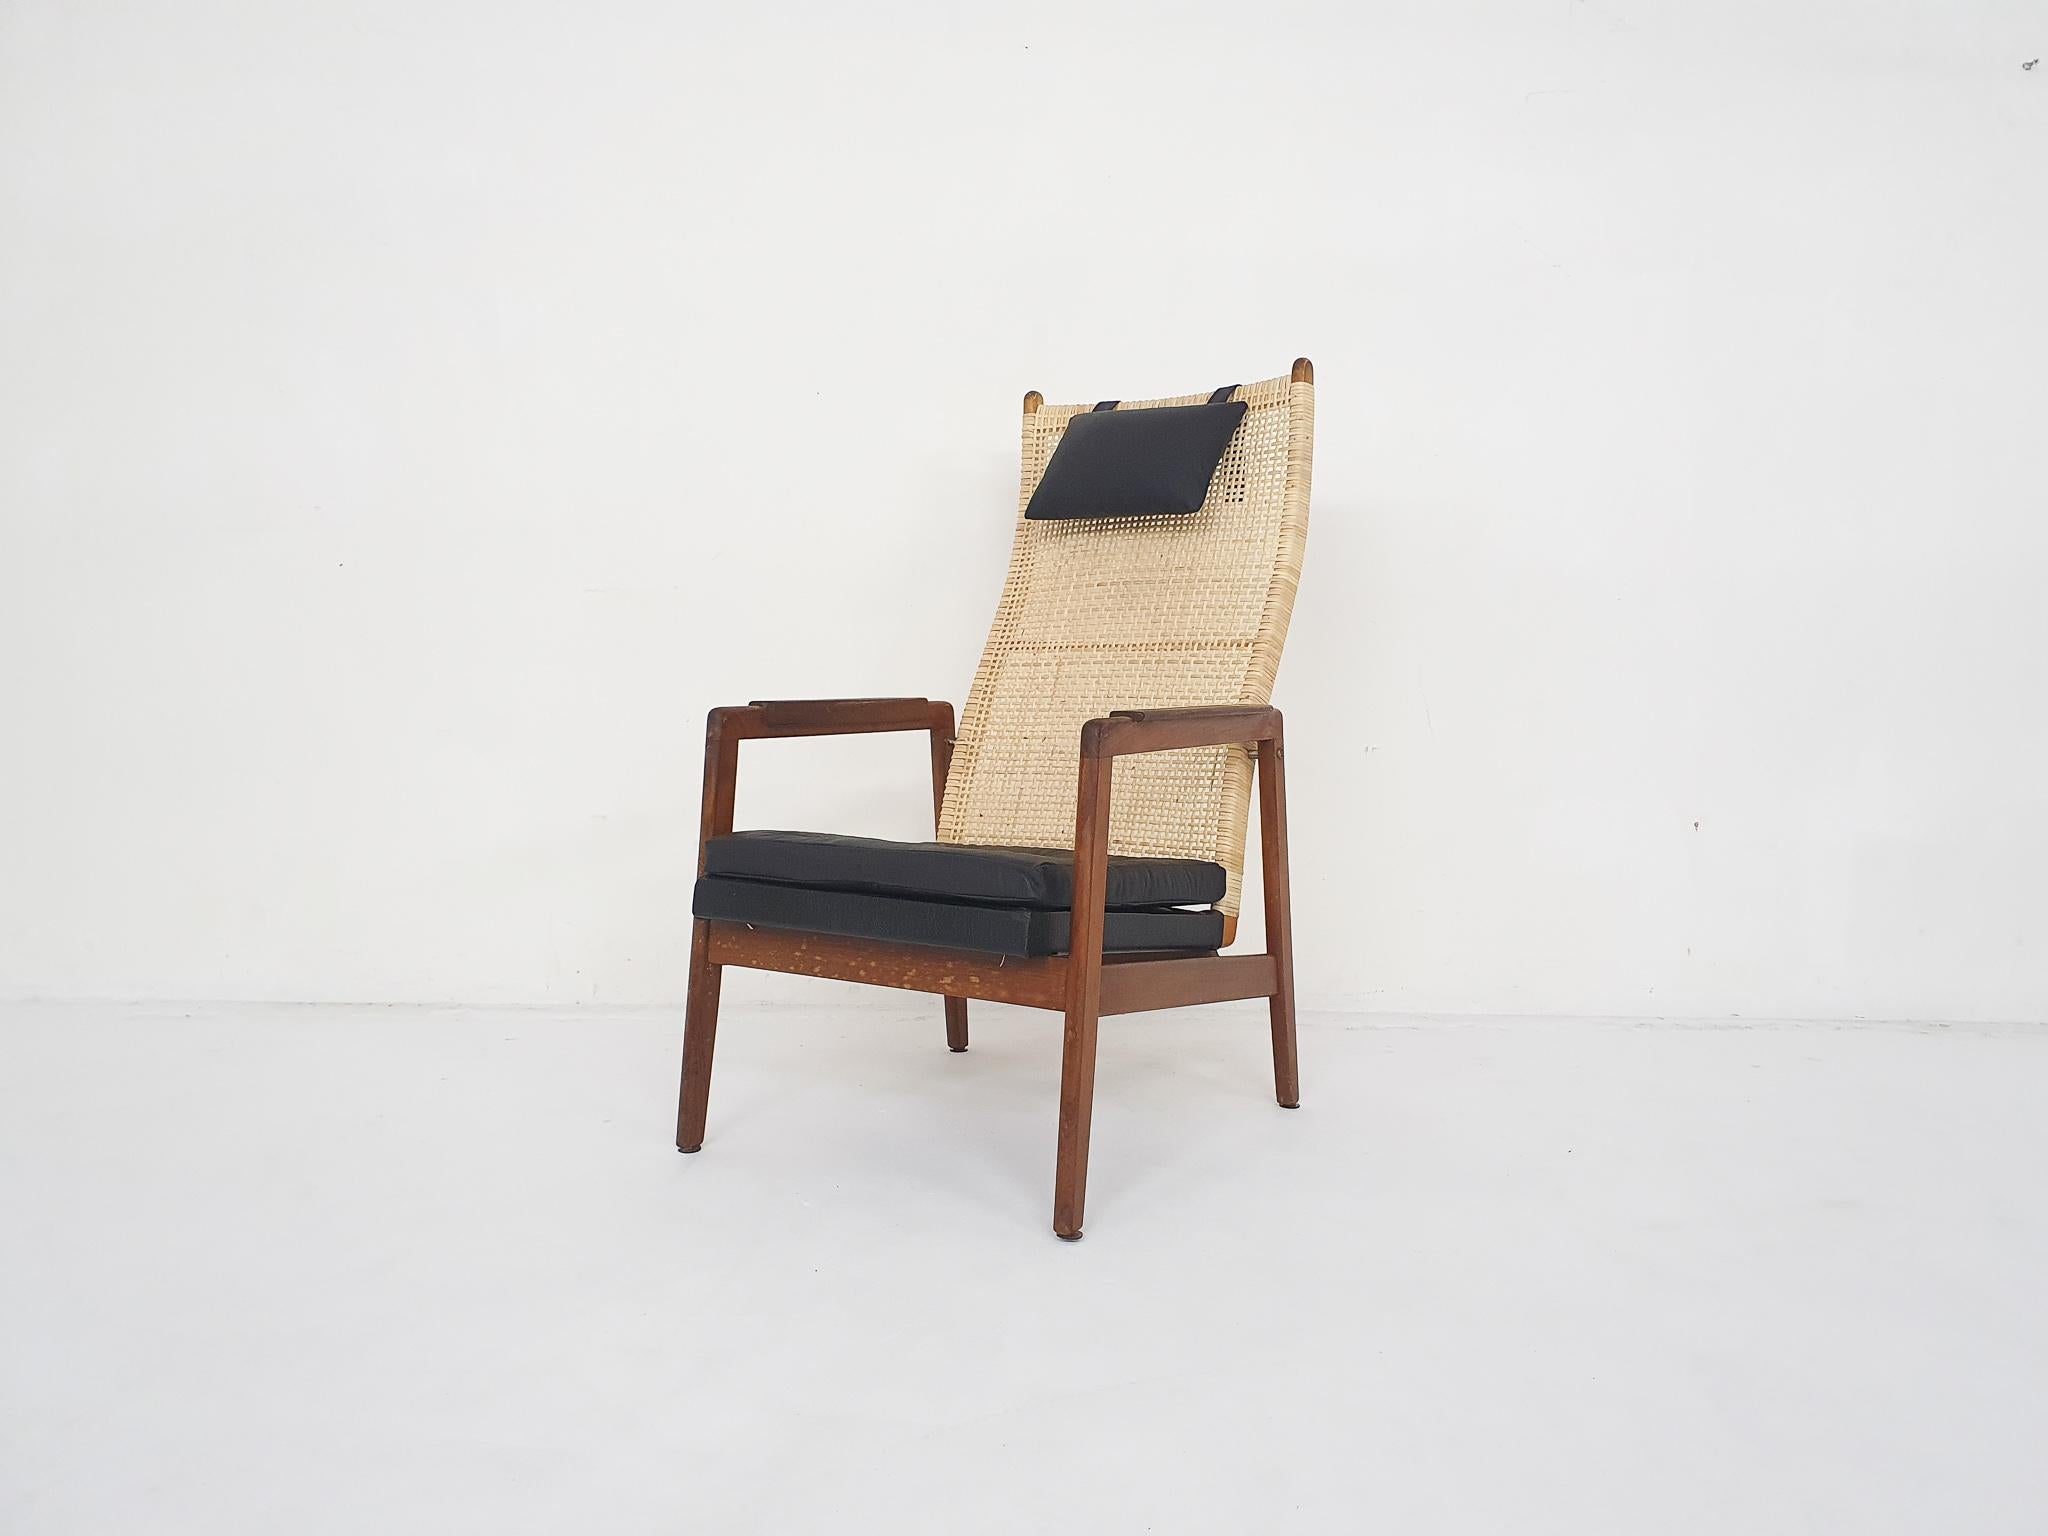 Elegant lounge chair with woven back and black leather cushion.
The back has new rattan and we made a new cushion with original black leather upholstery.

We also have a low-back model available, not included.
